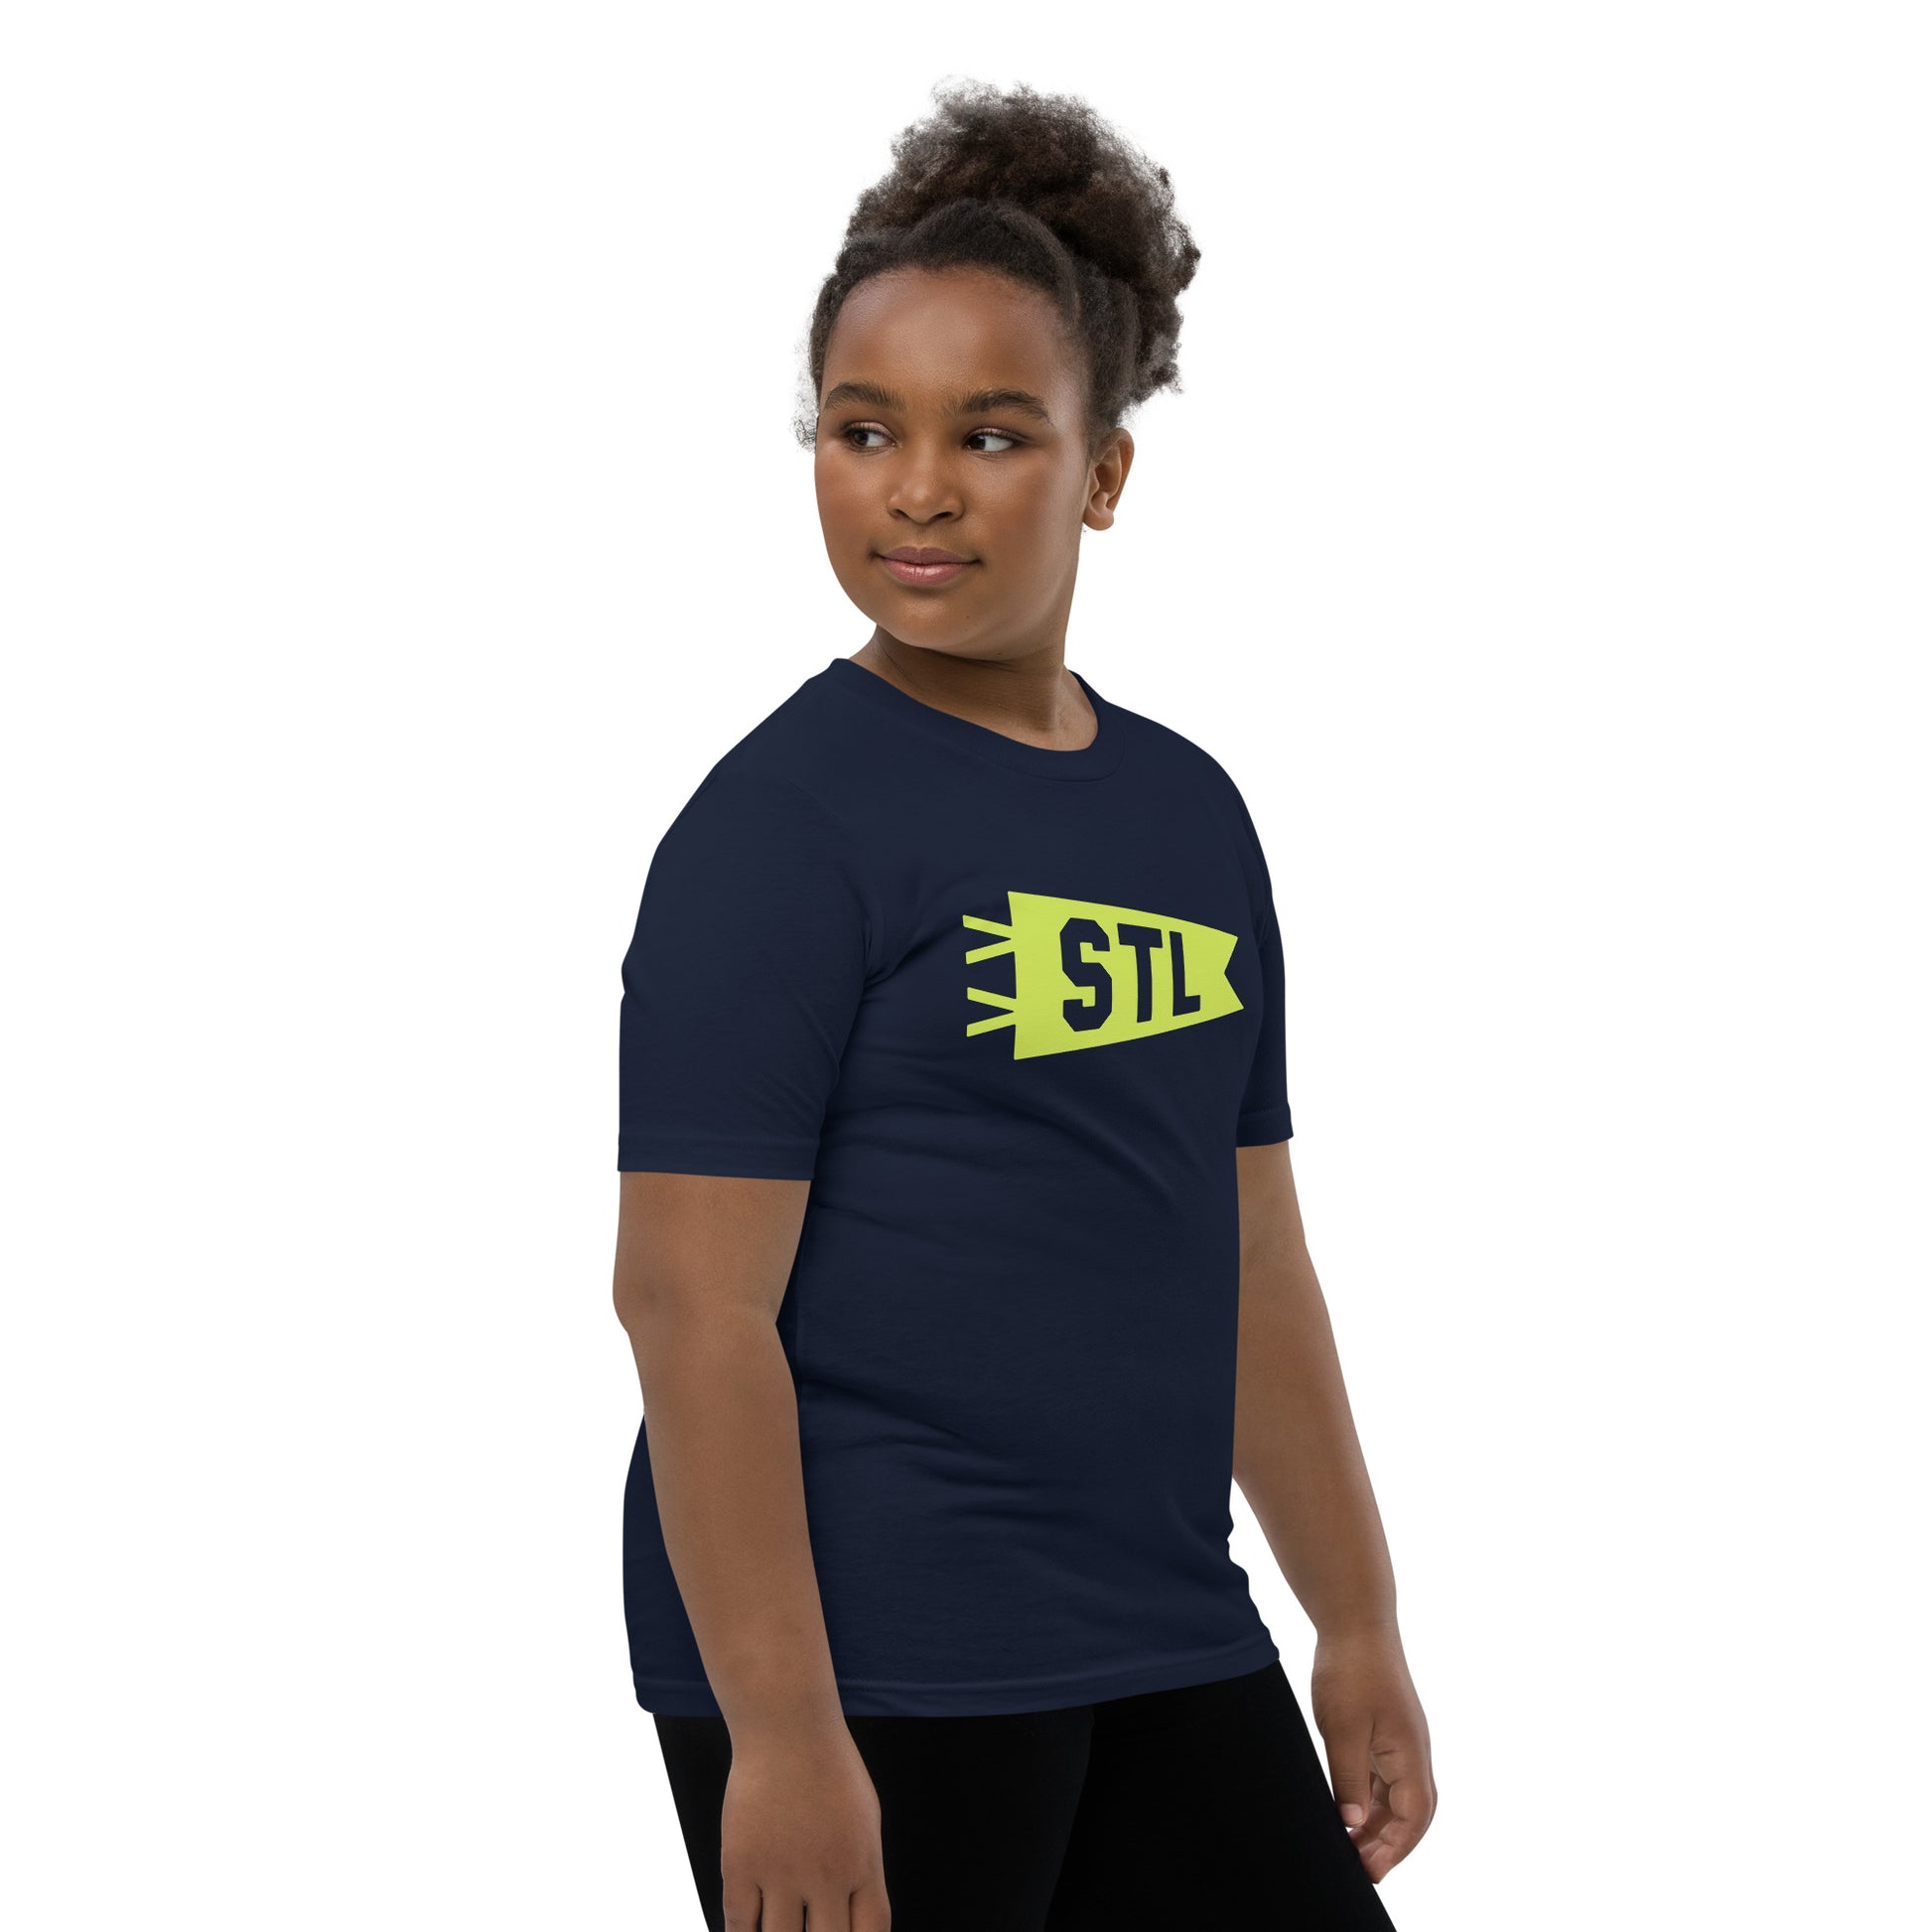 Kid's Airport Code Tee - Green Graphic • STL St. Louis • YHM Designs - Image 03